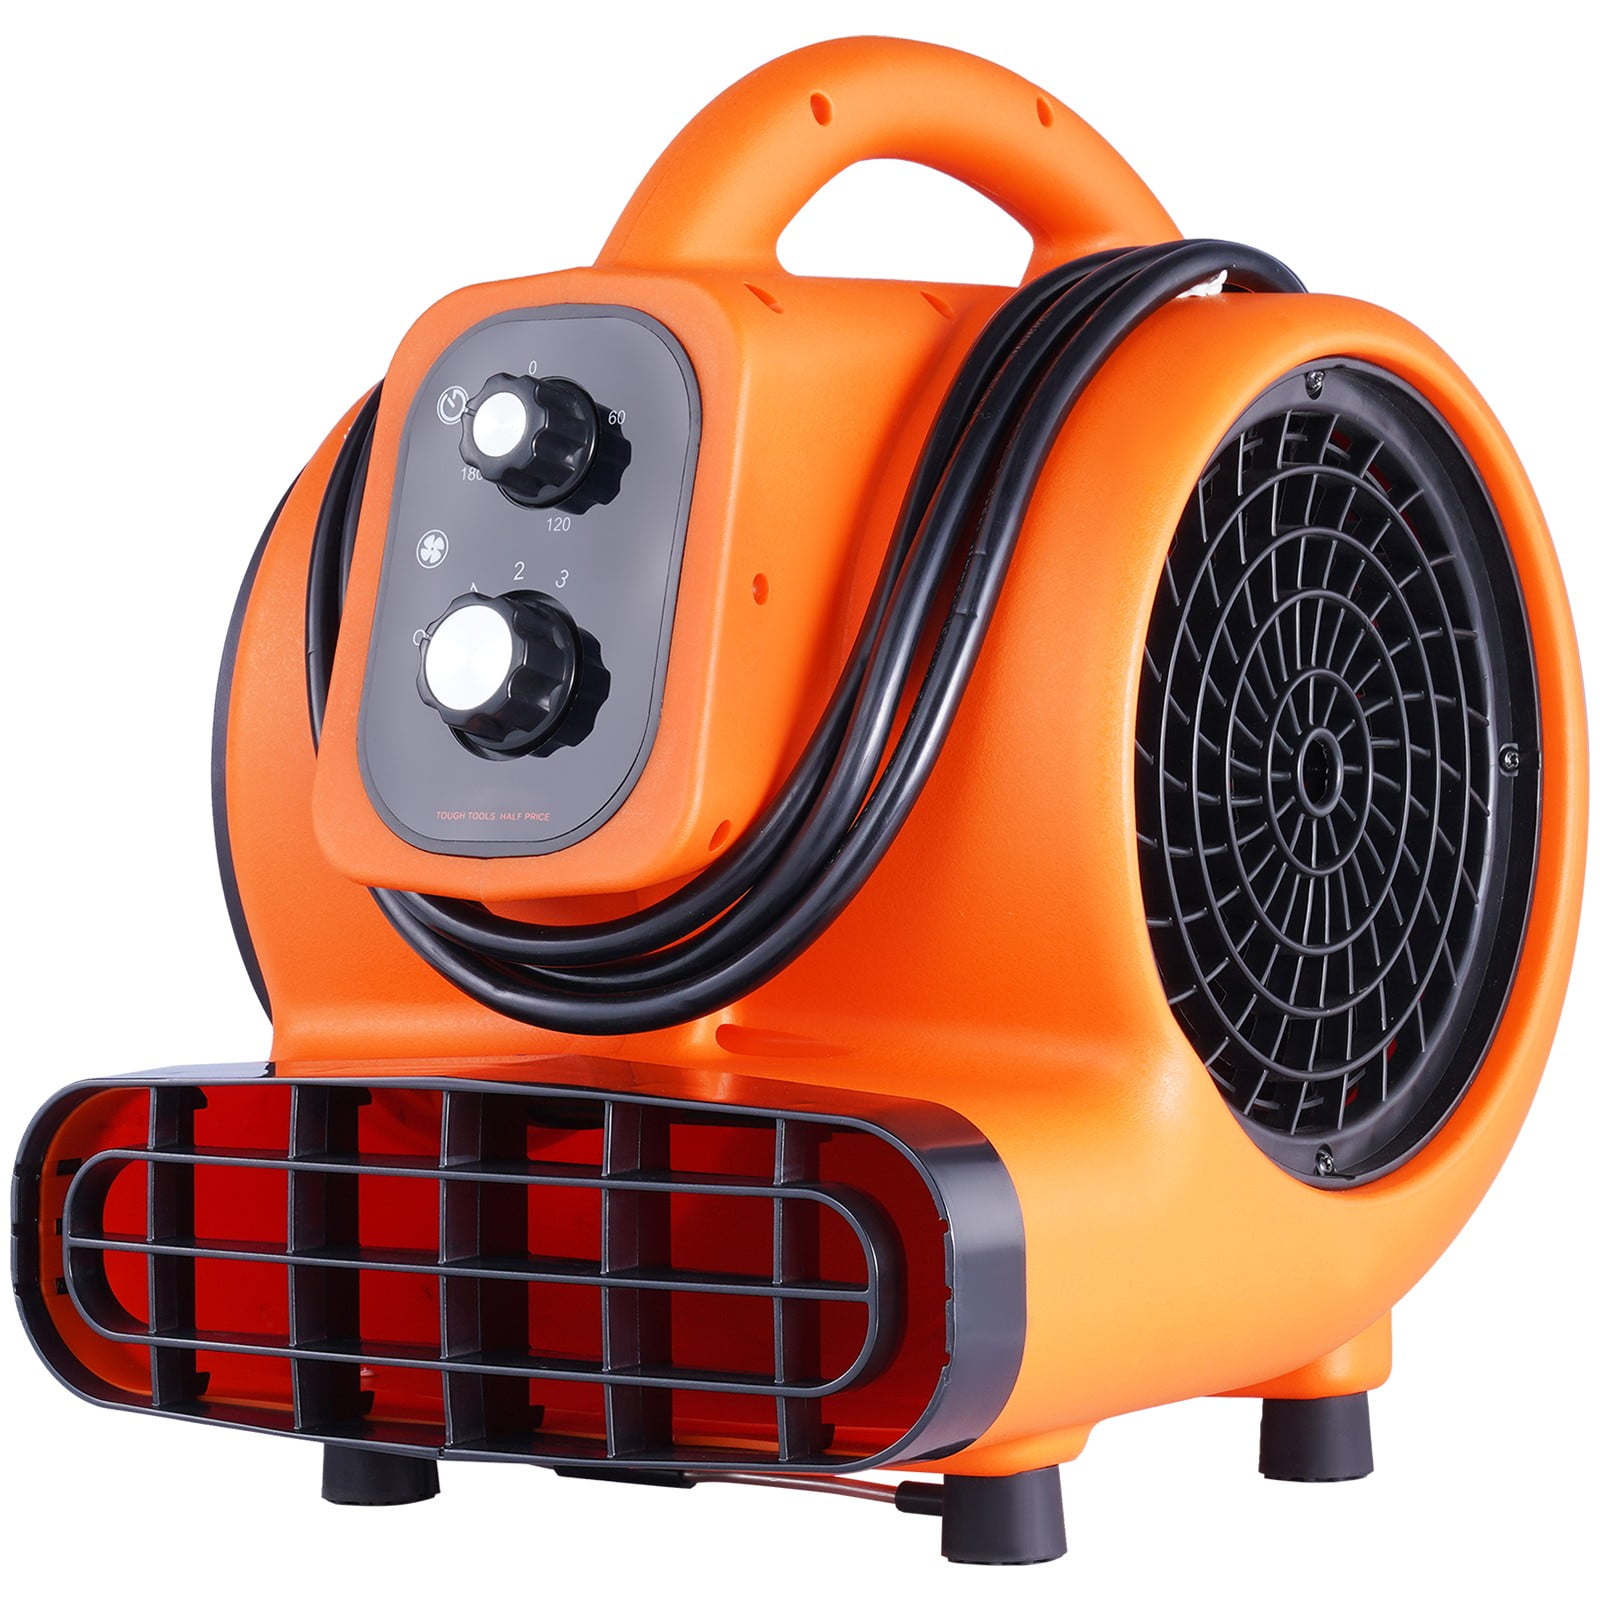 3 speed mini commercial air mover